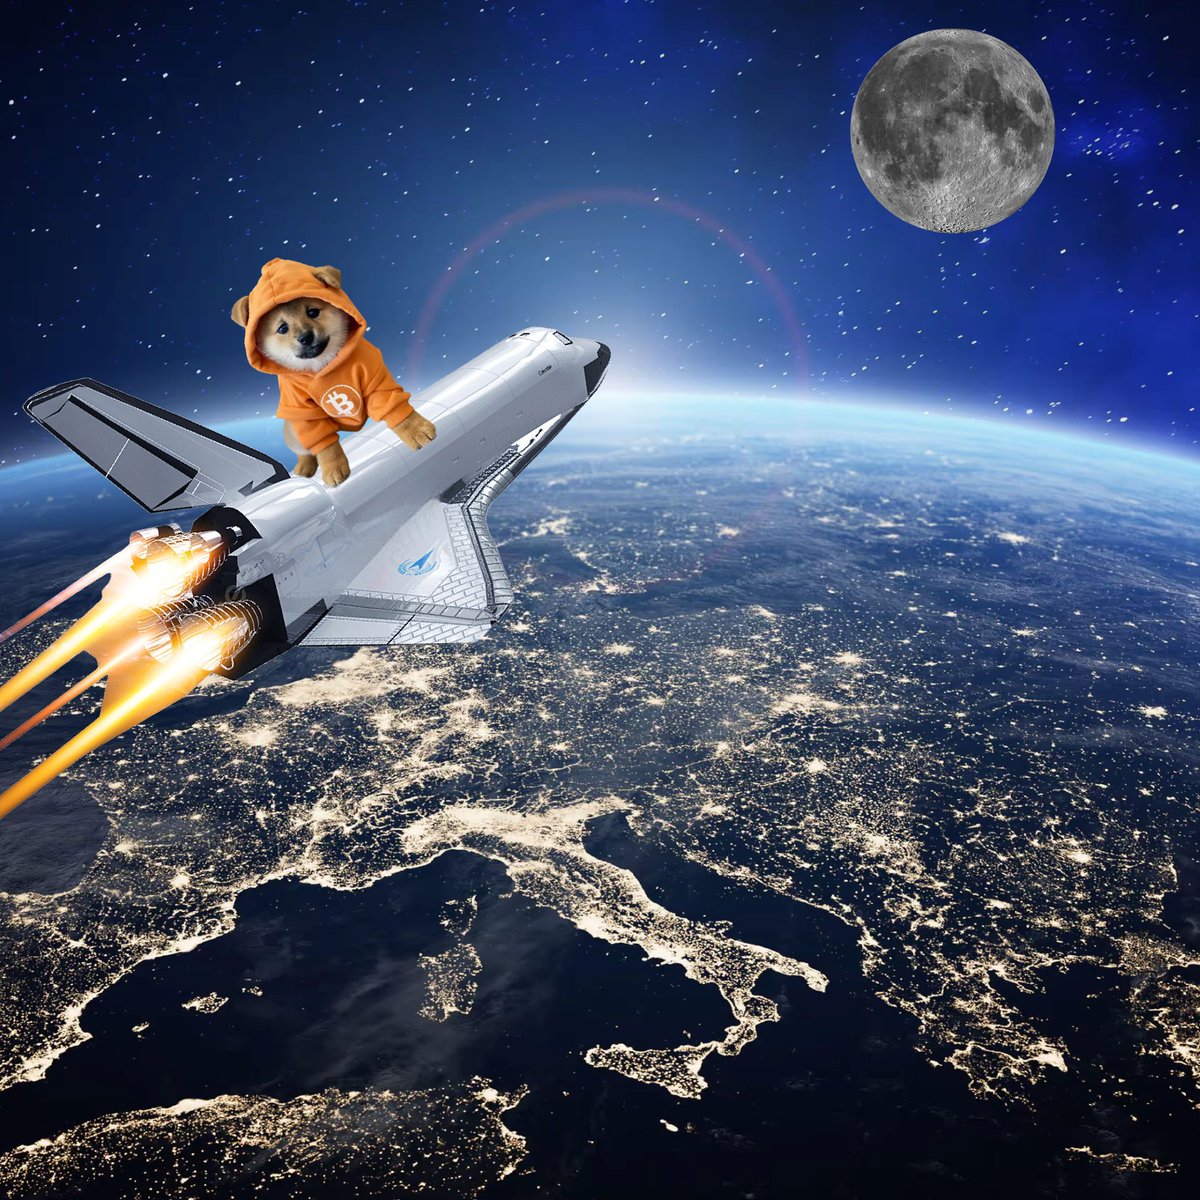 Repost if you are ready to send $DOG to the moon!